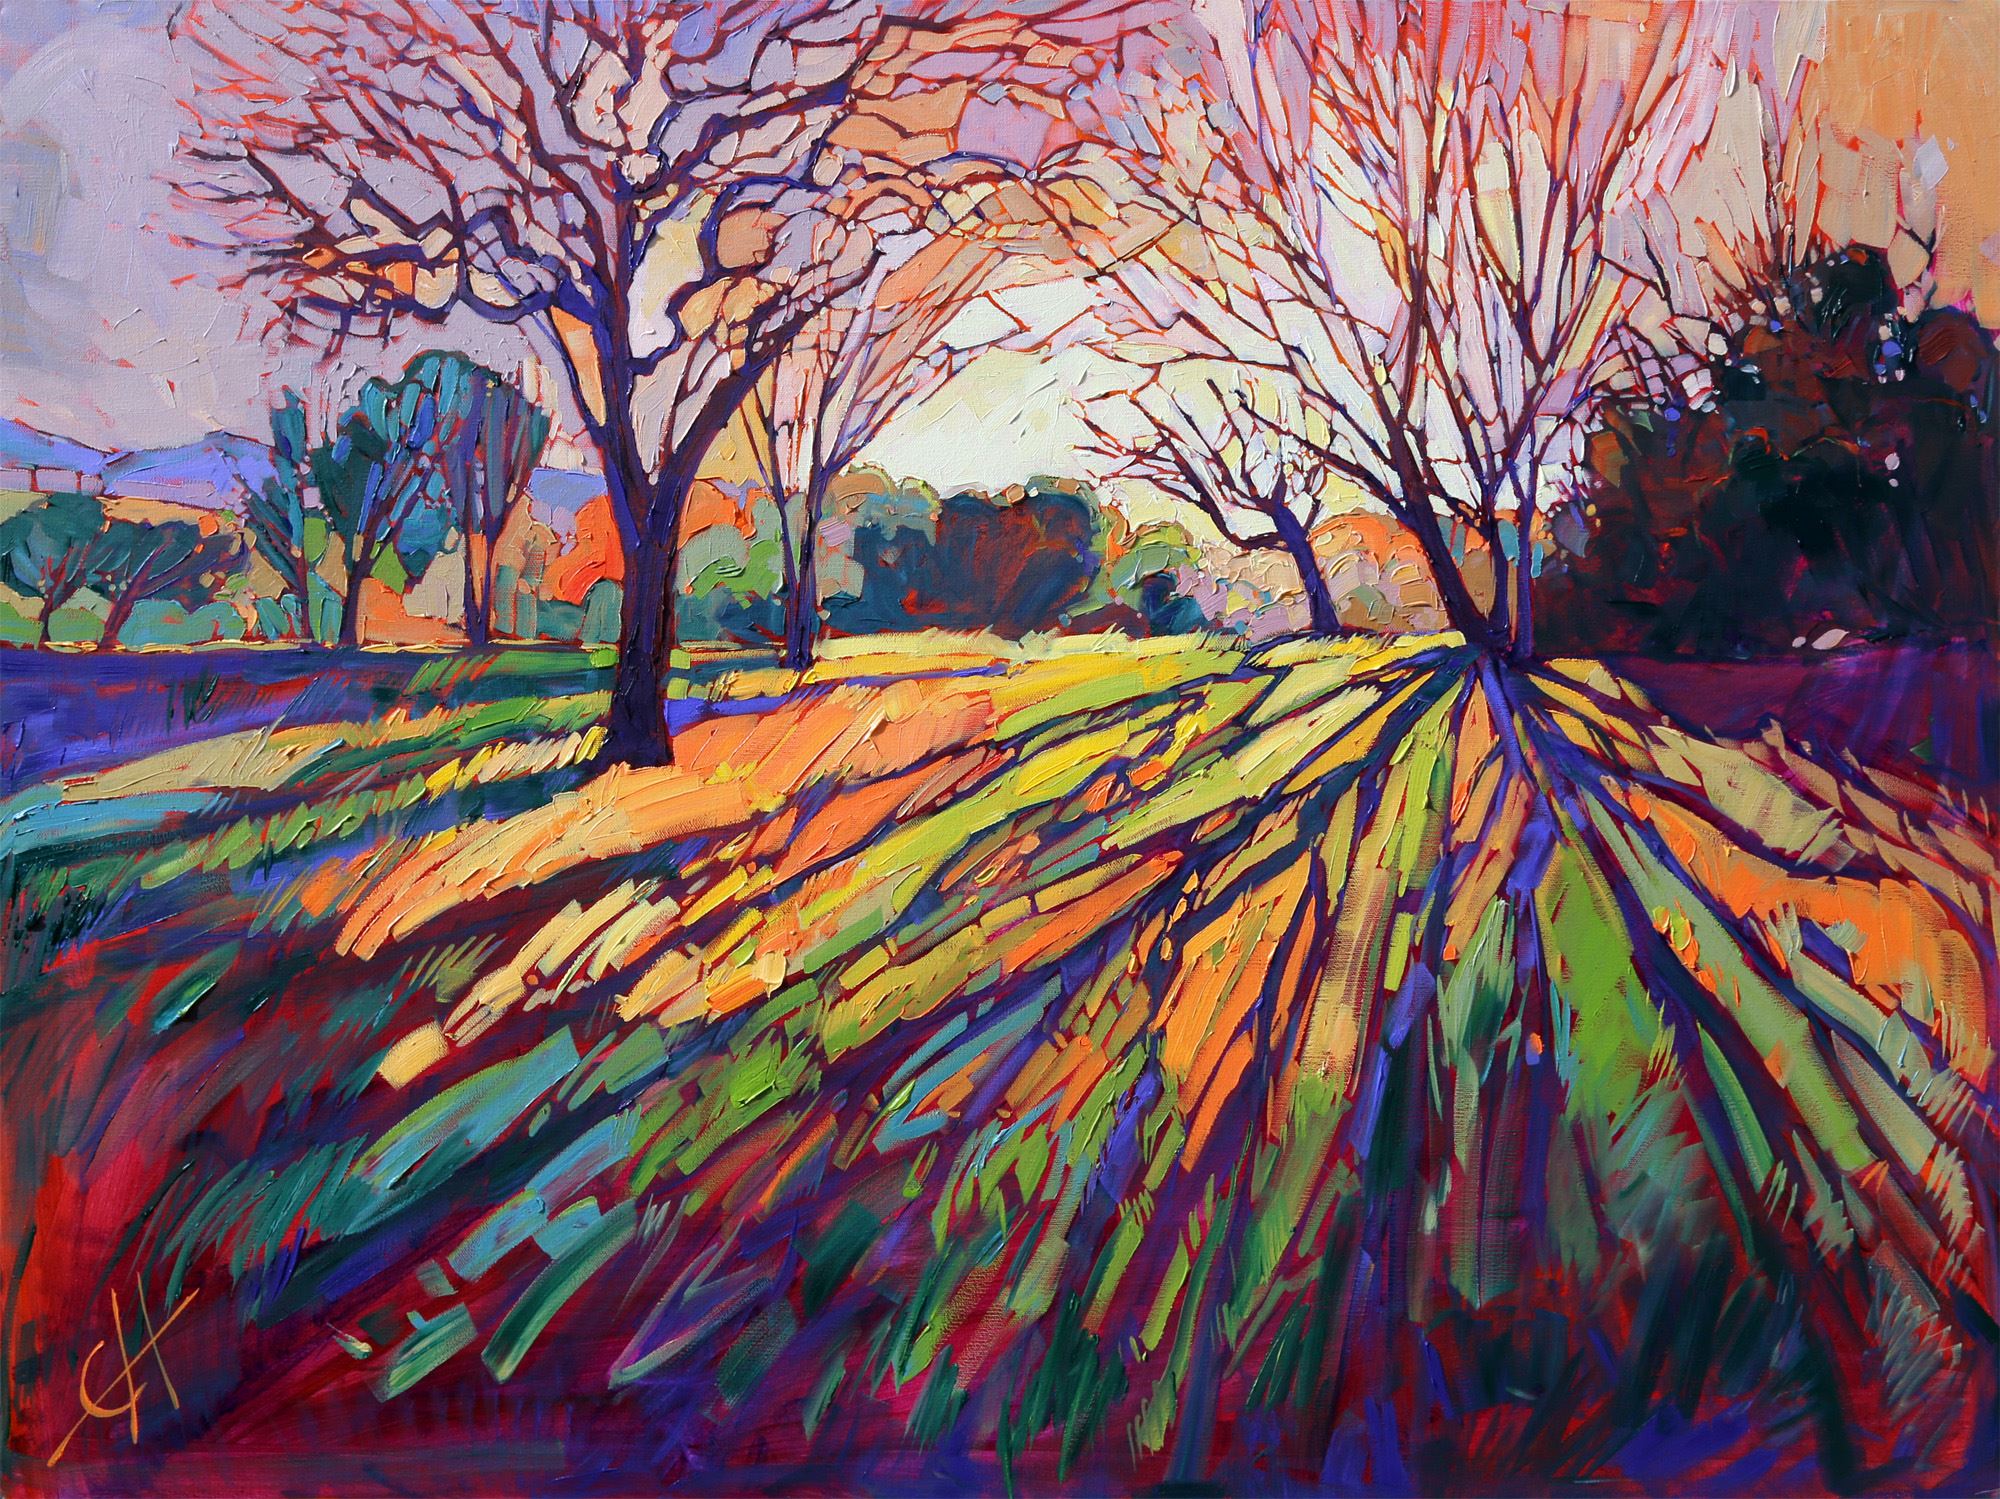 Iconic Works Crystal Light , oil on canvas, 2013 &ldquo;Erin Hanson&rsquo;s iconic Crystal Light series was born in 2013 with her pivotal painting  Crystal Light . This impressionist oil painting captured the prismatic spectrum of refracted light in a painted pattern resembling a butterfly&rsquo;s wing. This piece has become synonymous with Hanson&rsquo;s Open Impressionistic style, and she has since created a whole series of popular works which capture mosaic prisms of light. These paintings are considered Hanson&rsquo;s first movement in the evolution of her style.&rdquo; &ndash; Artfixdaily.com&nbsp; 